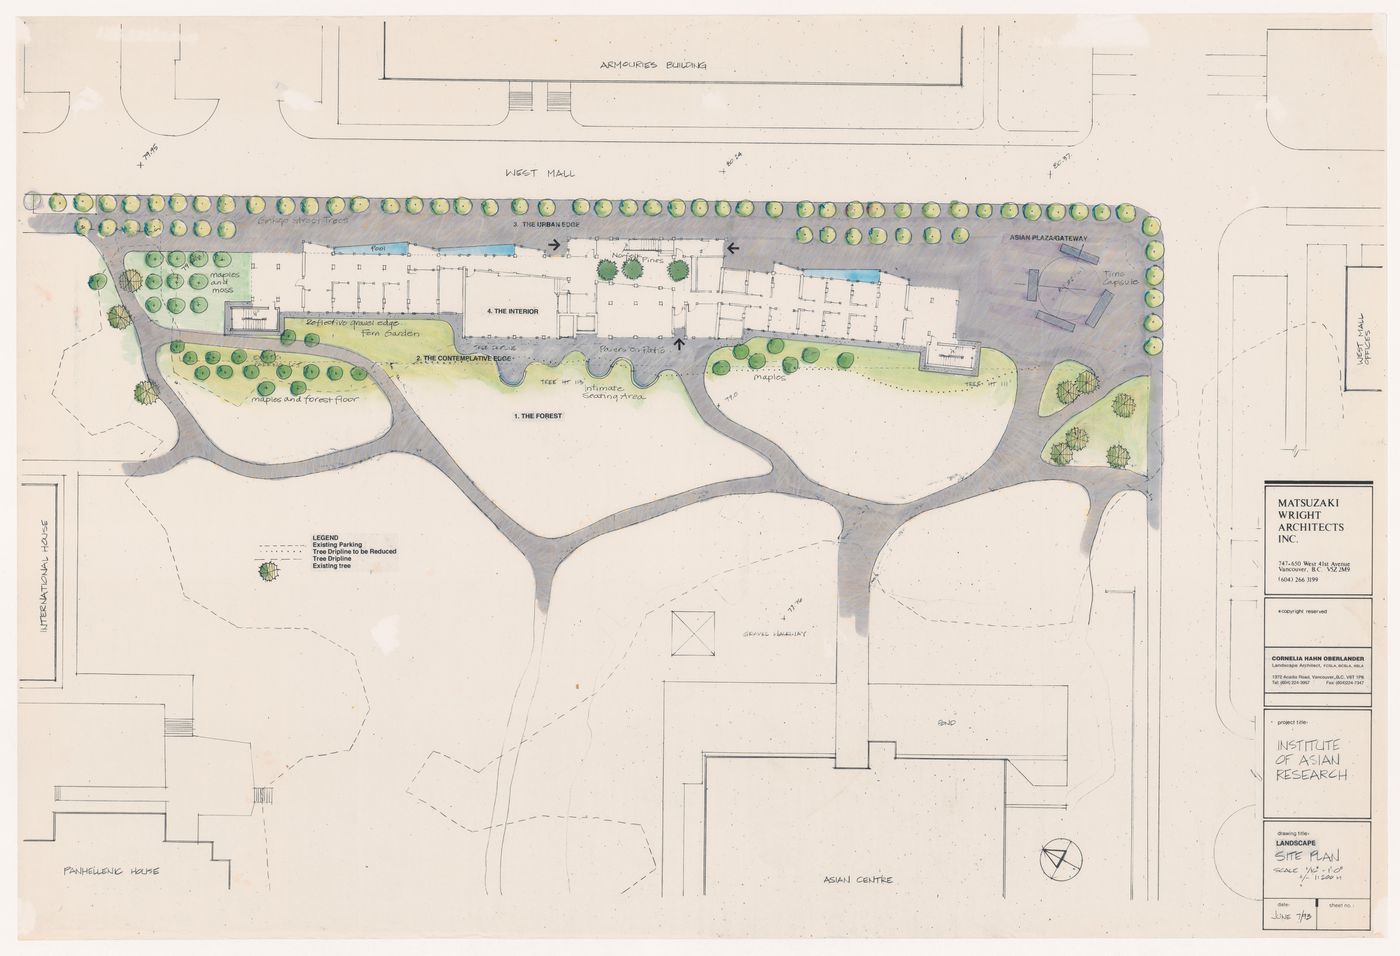 Site plan for C. K. Choi Institute of Asian Research, University of British Columbia, Vancouver, British Columbia